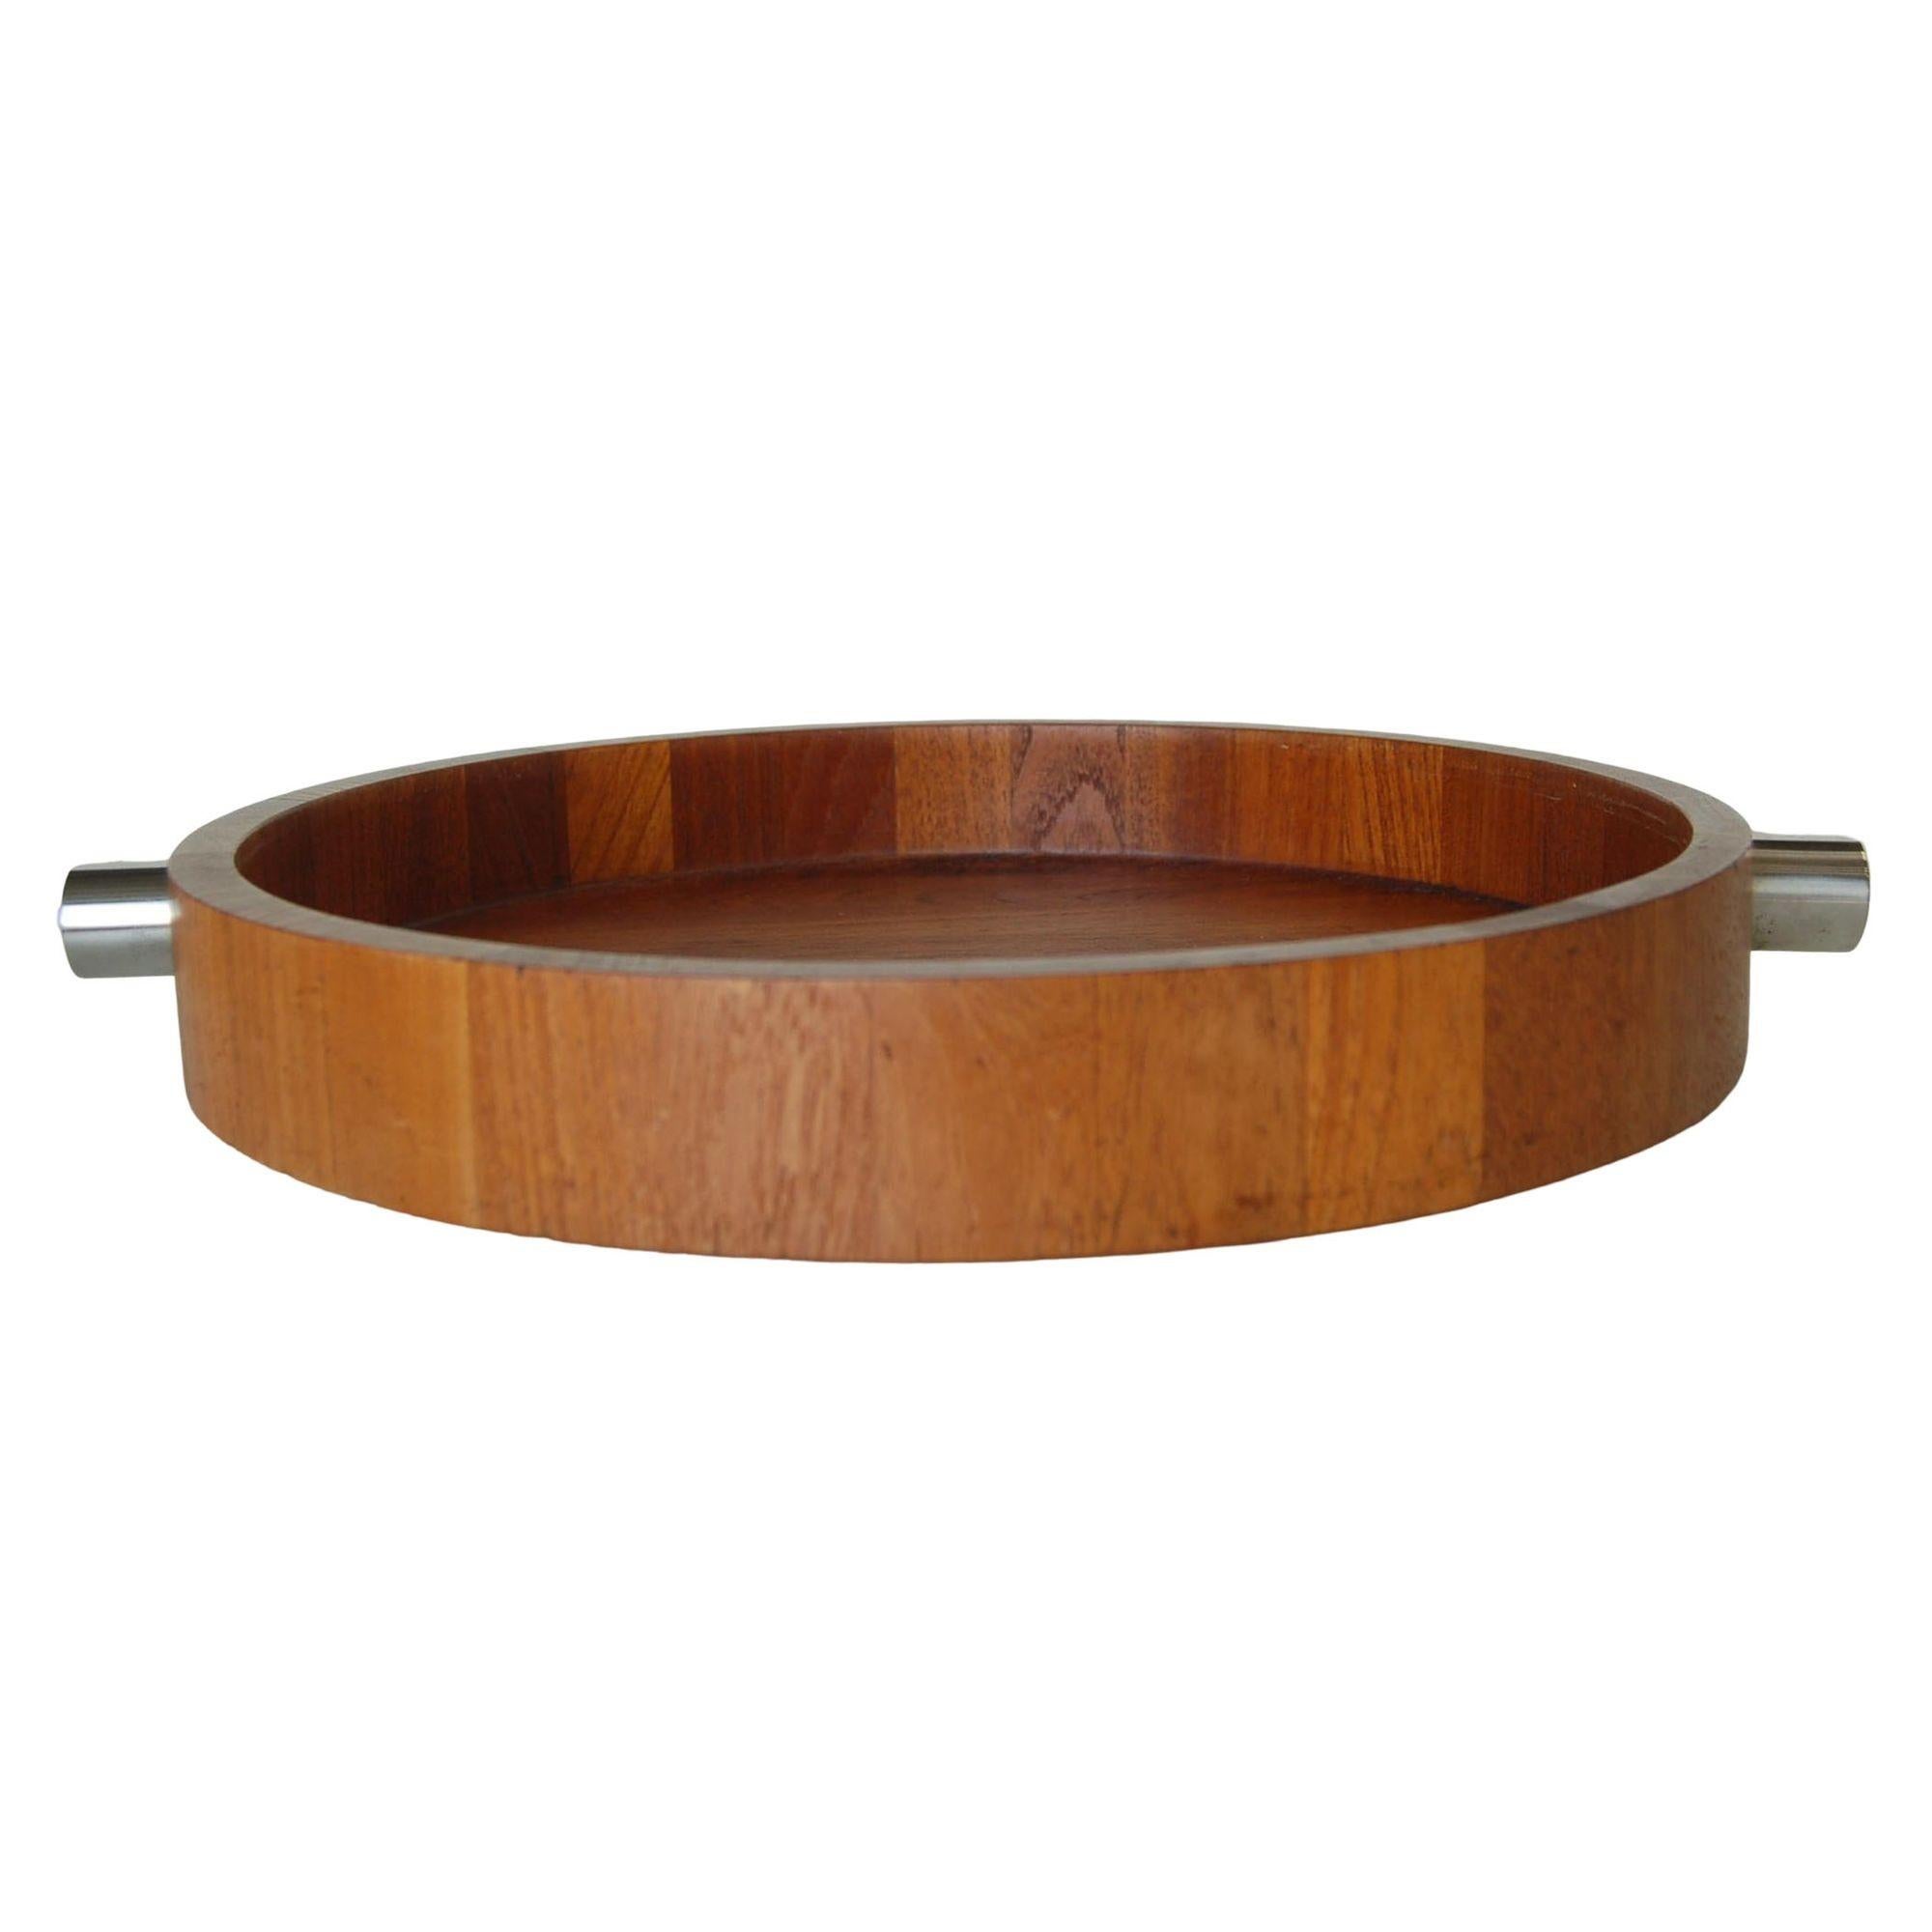 Mid Century Teak And Stainless Steel Accented Salad Serving Bowl By Cobblewood Lundtofte Denmark. 

Marked #6070 

Measures 2.5